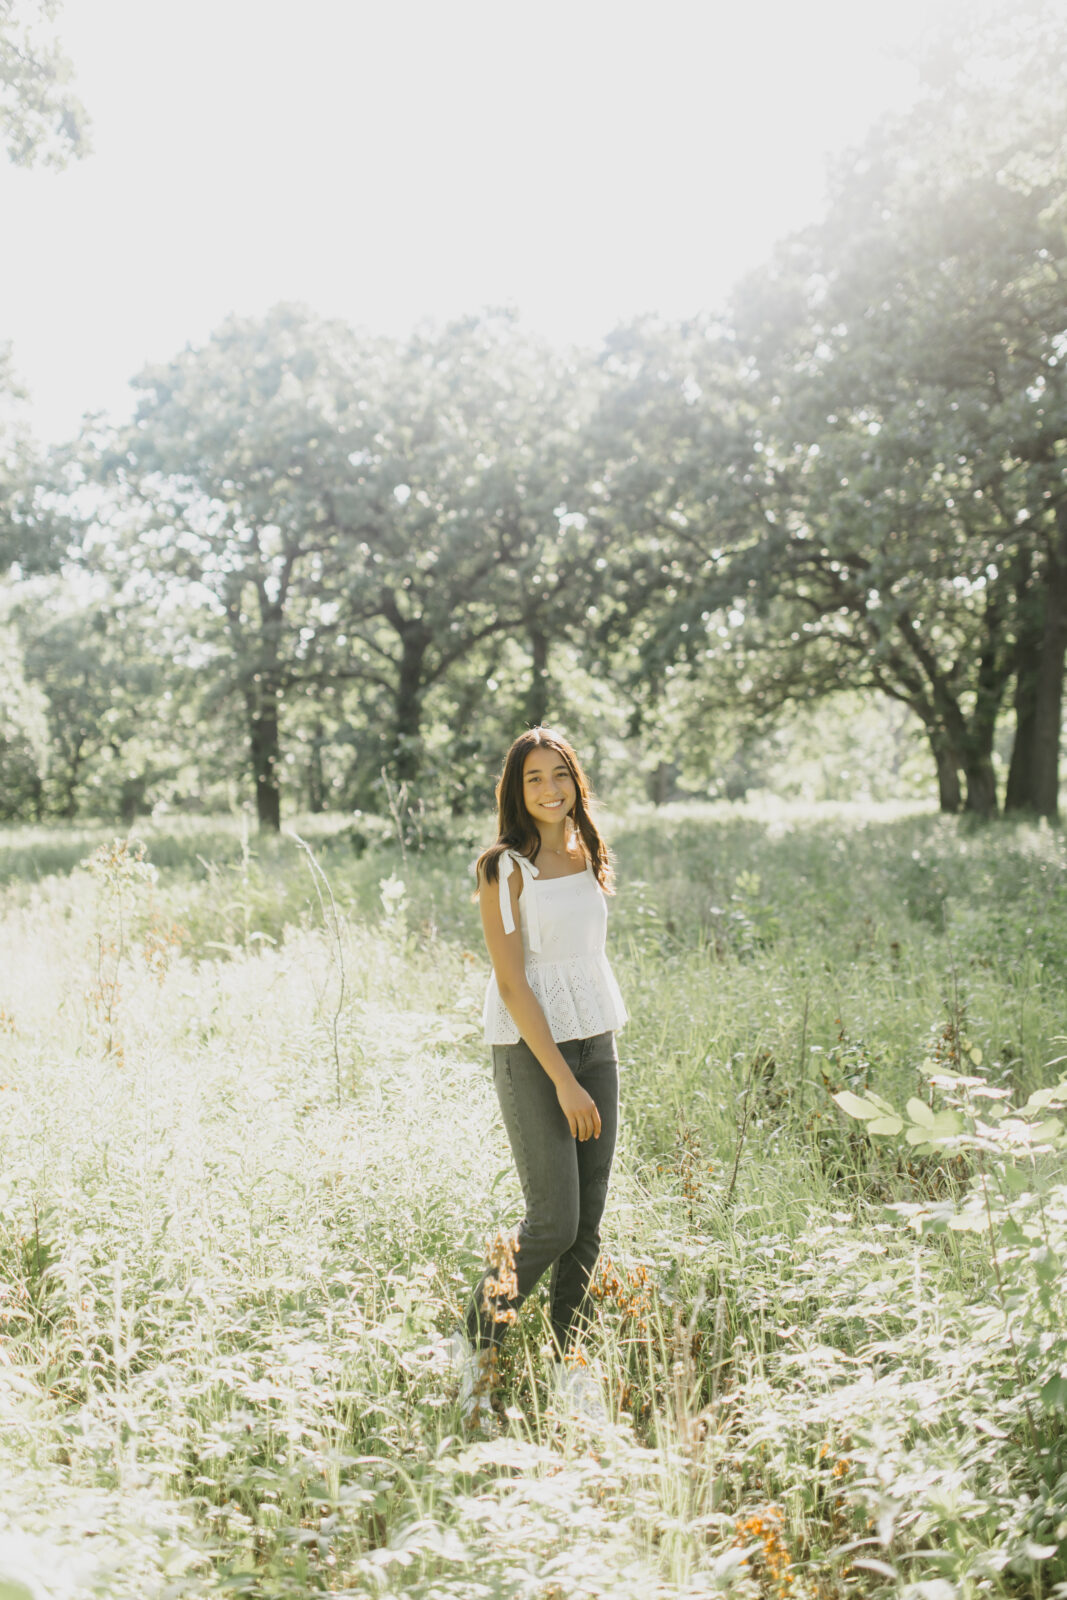 A smiling high school senior captured against a backdrop of nature in a photograph.